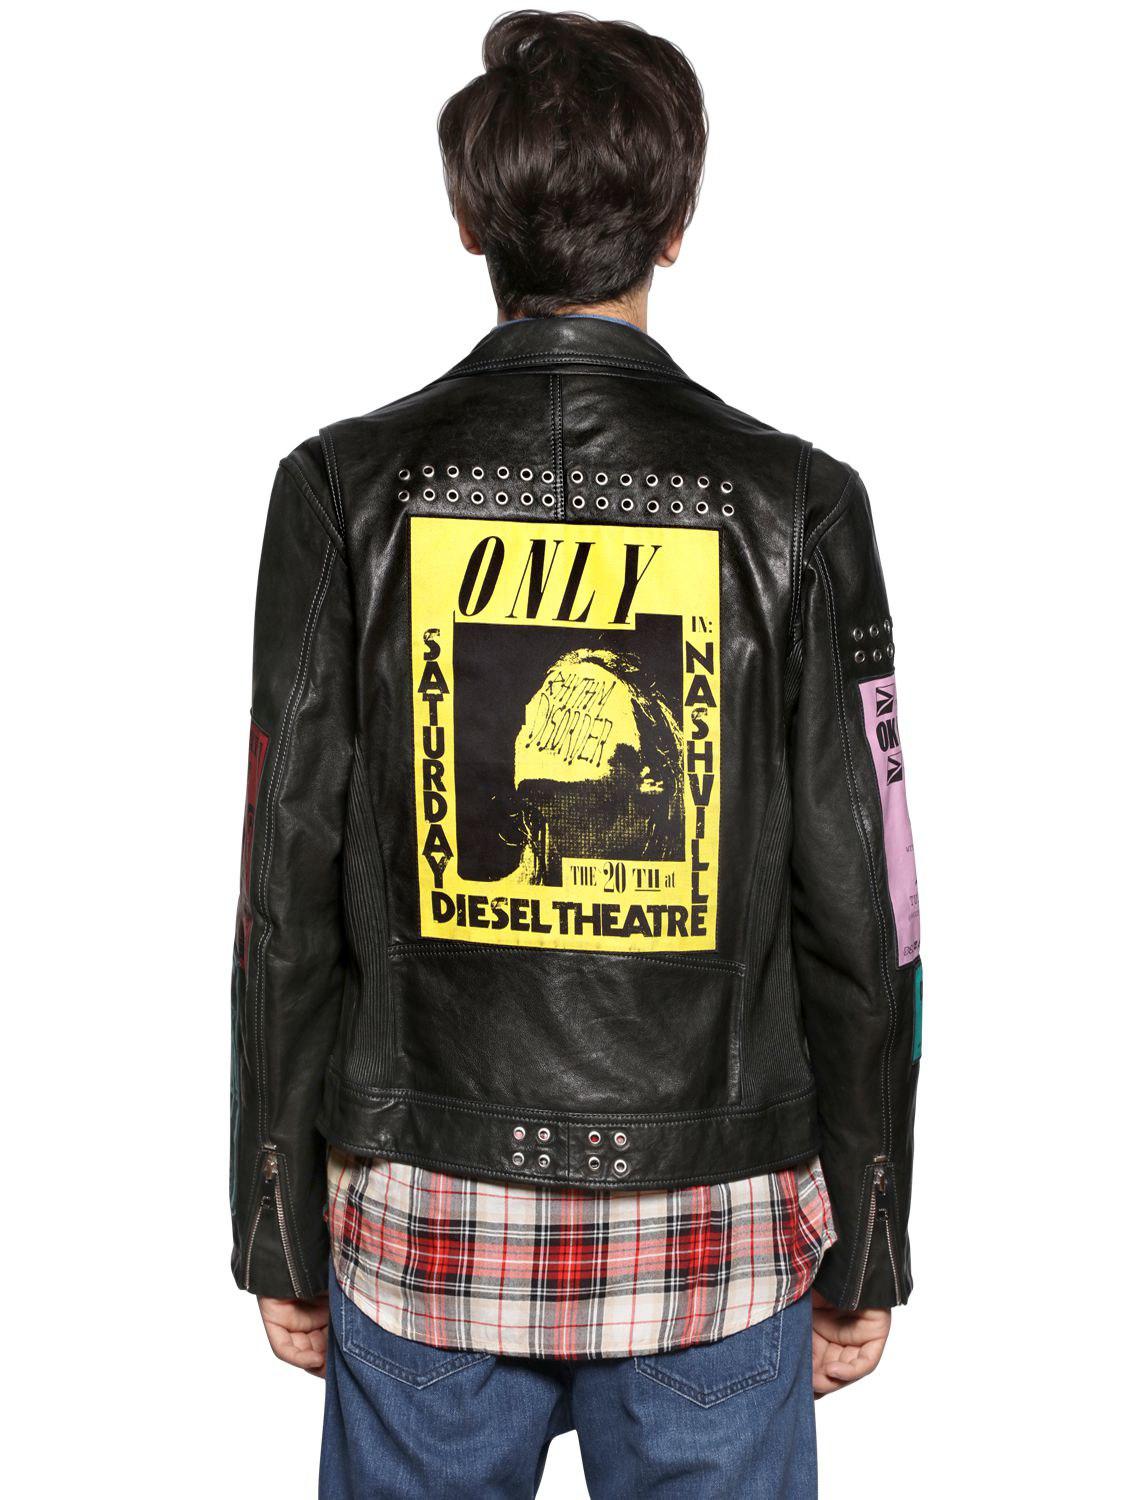 DIESEL Leather Biker Jacket W/ Patches & Studs in Black for Men - Lyst